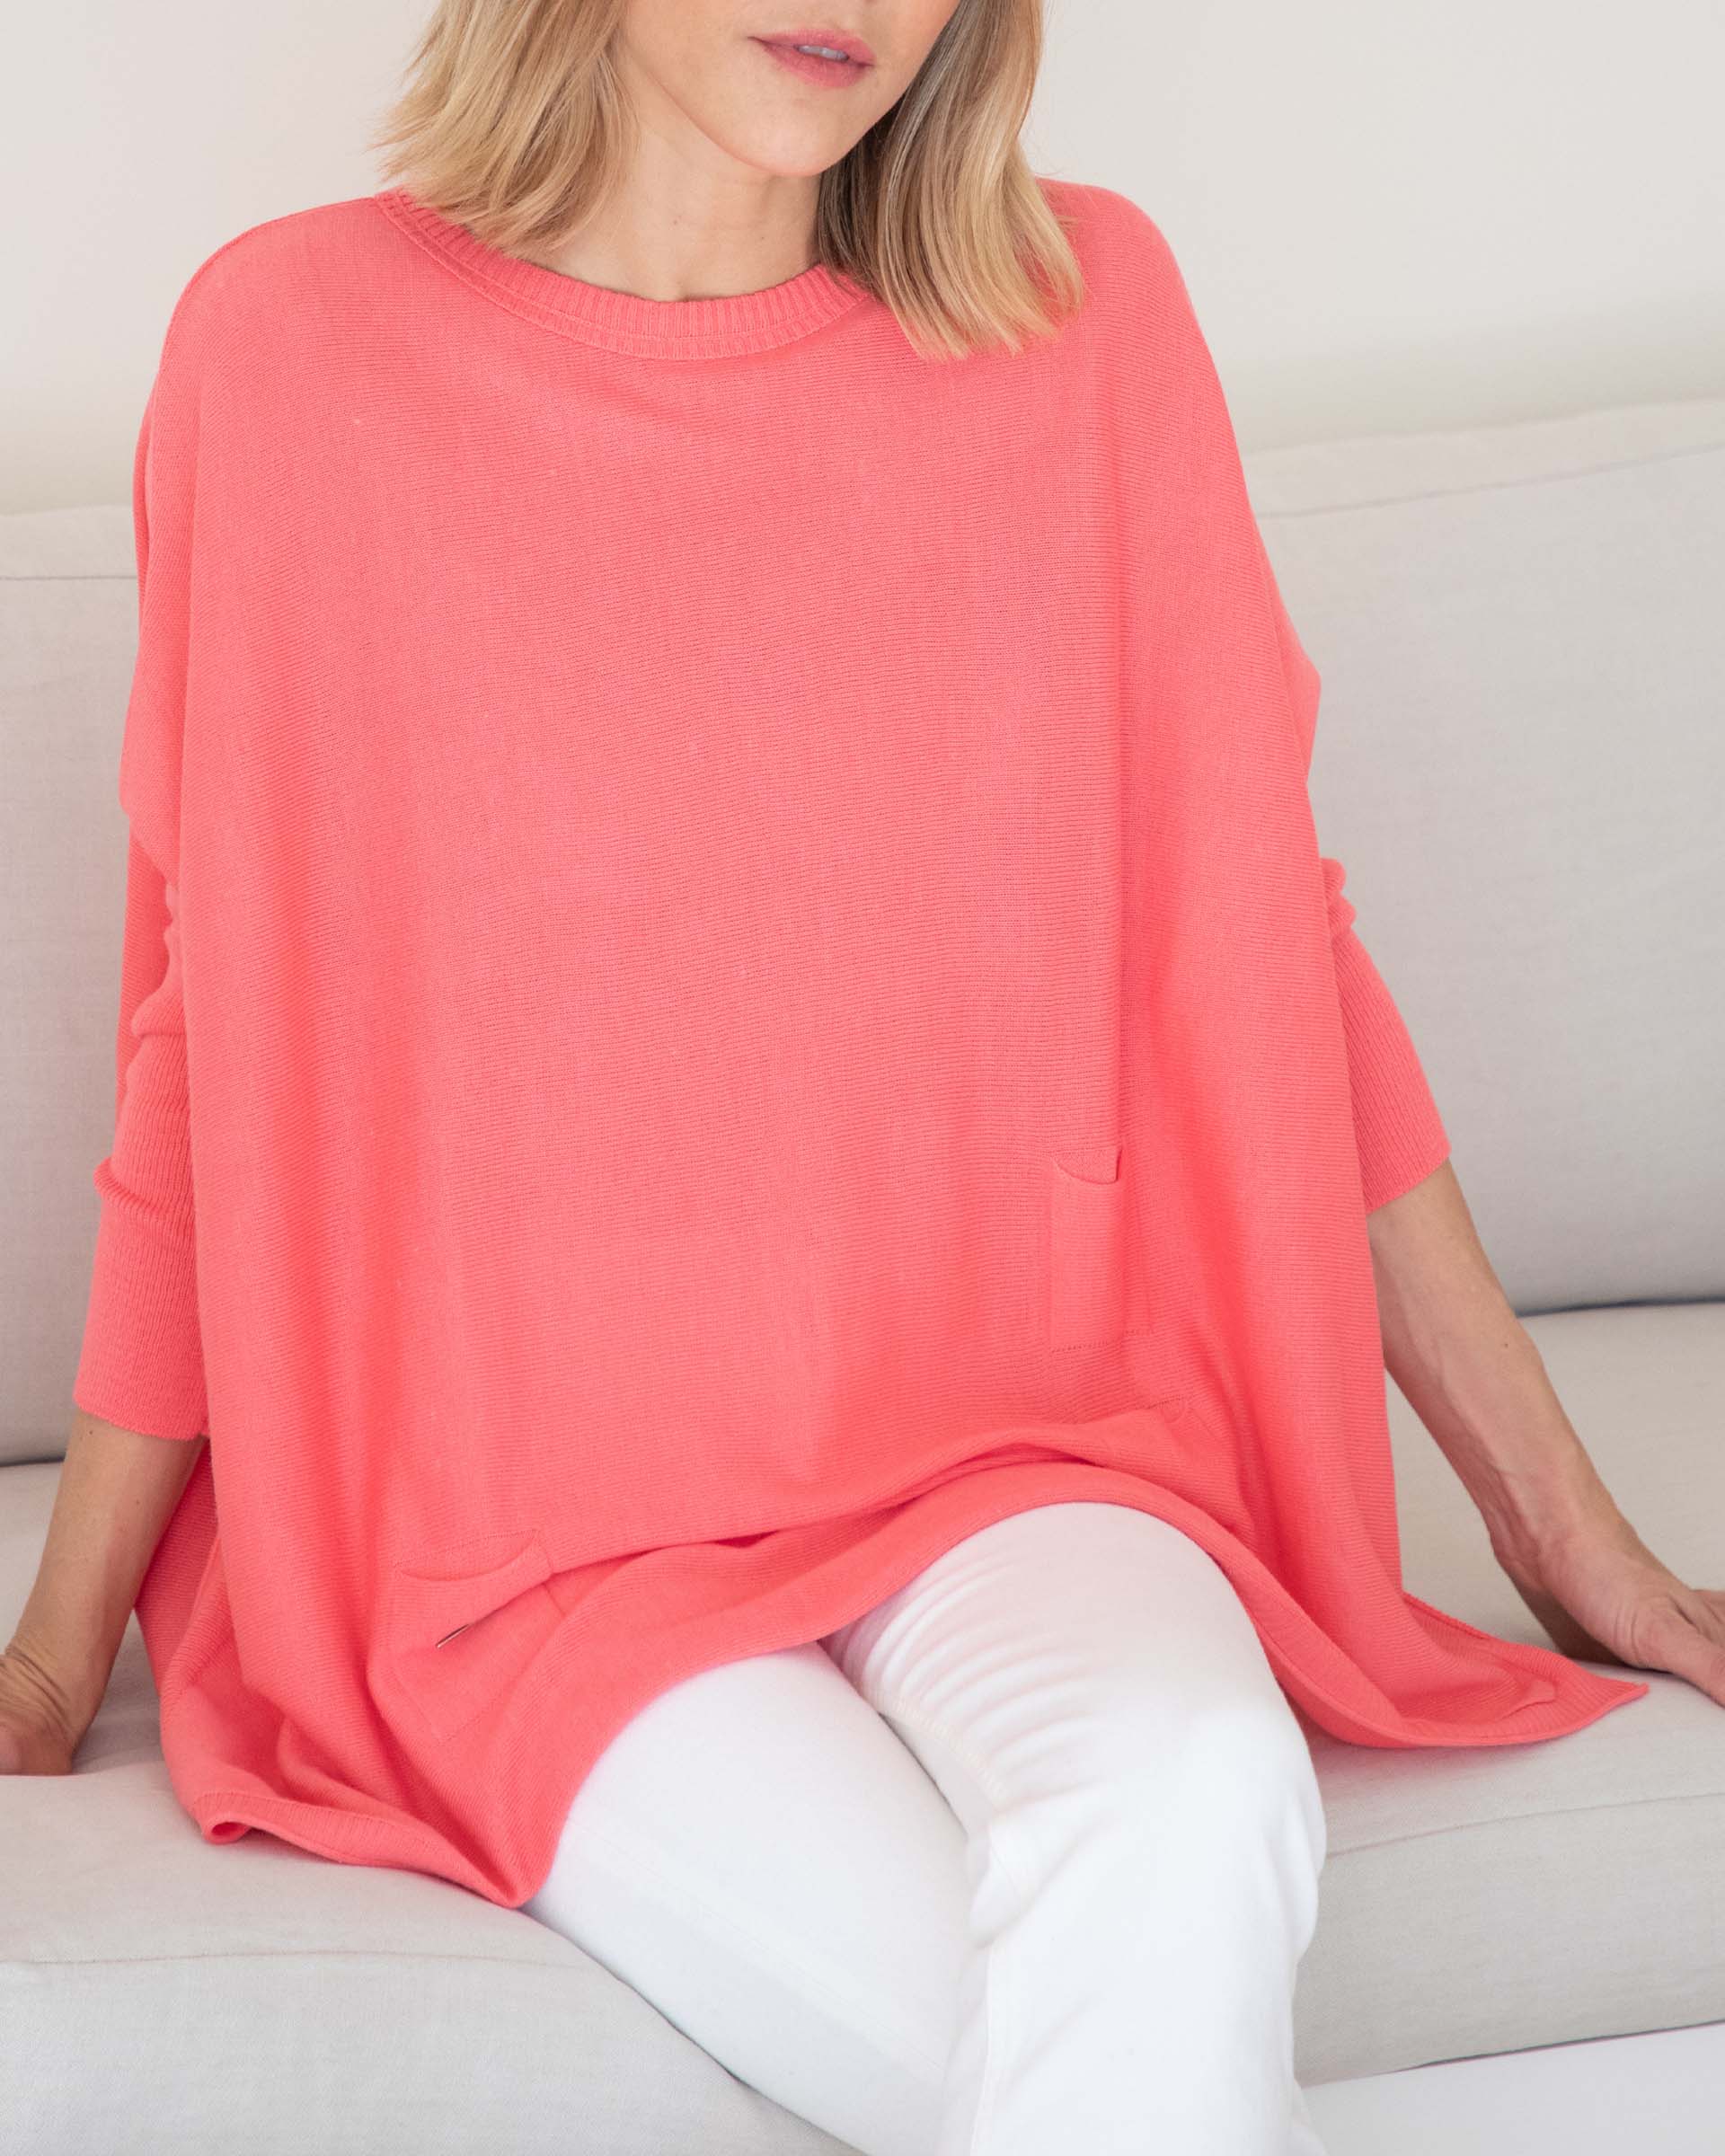 Women's Oversized Crewneck Knit Sweater in Coral Pink Chest View